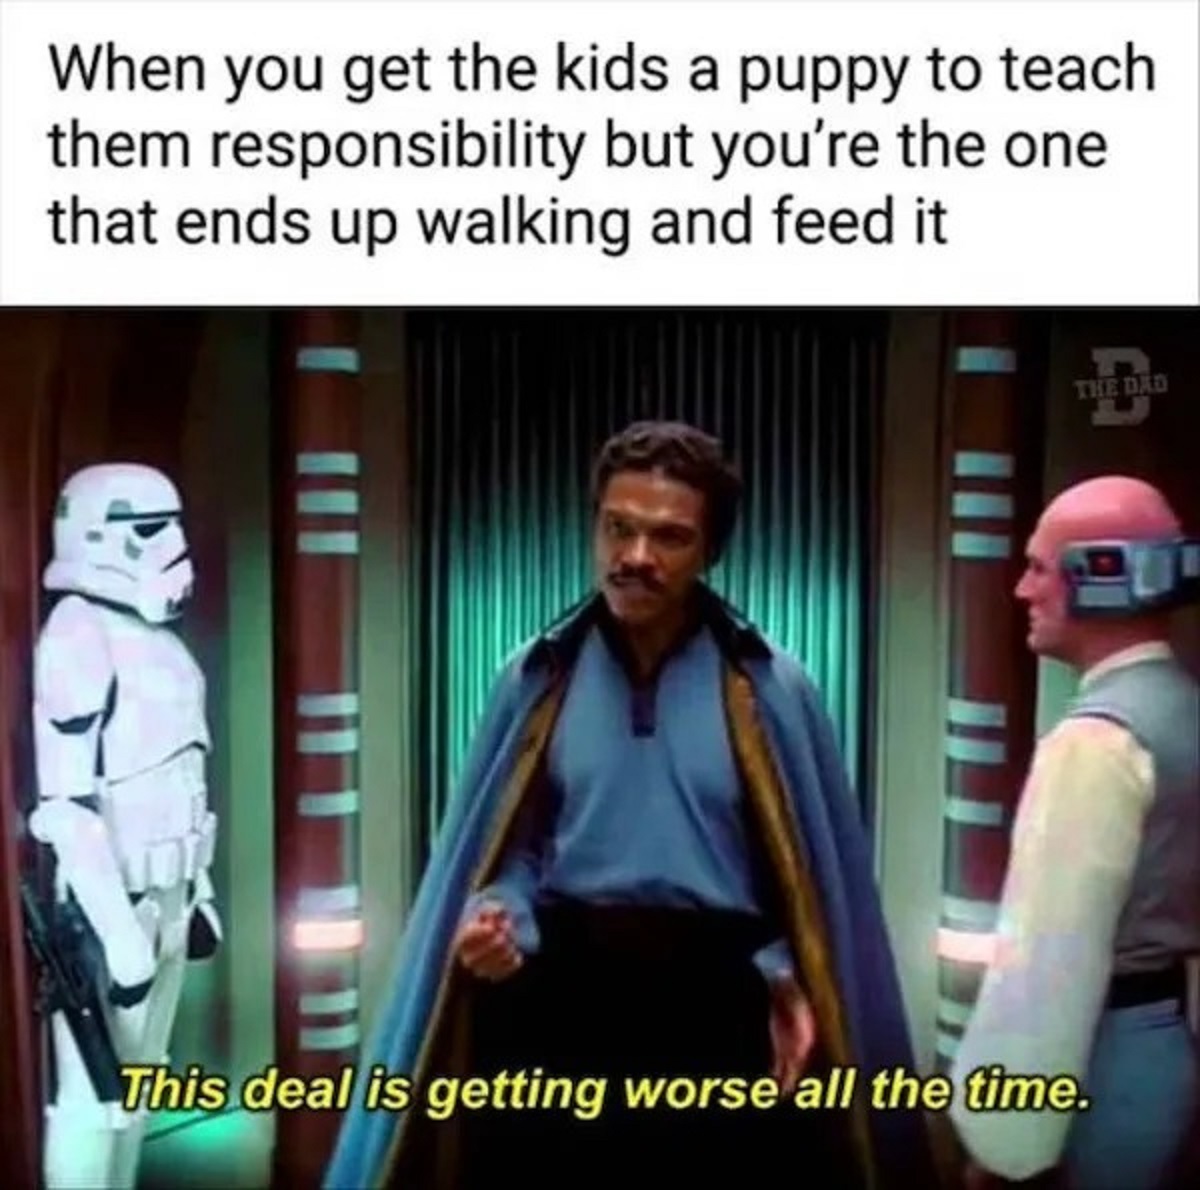 deal keeps getting worse - When you get the kids a puppy to teach them responsibility but you're the one that ends up walking and feed it This deal is getting worse all the time. The Dad